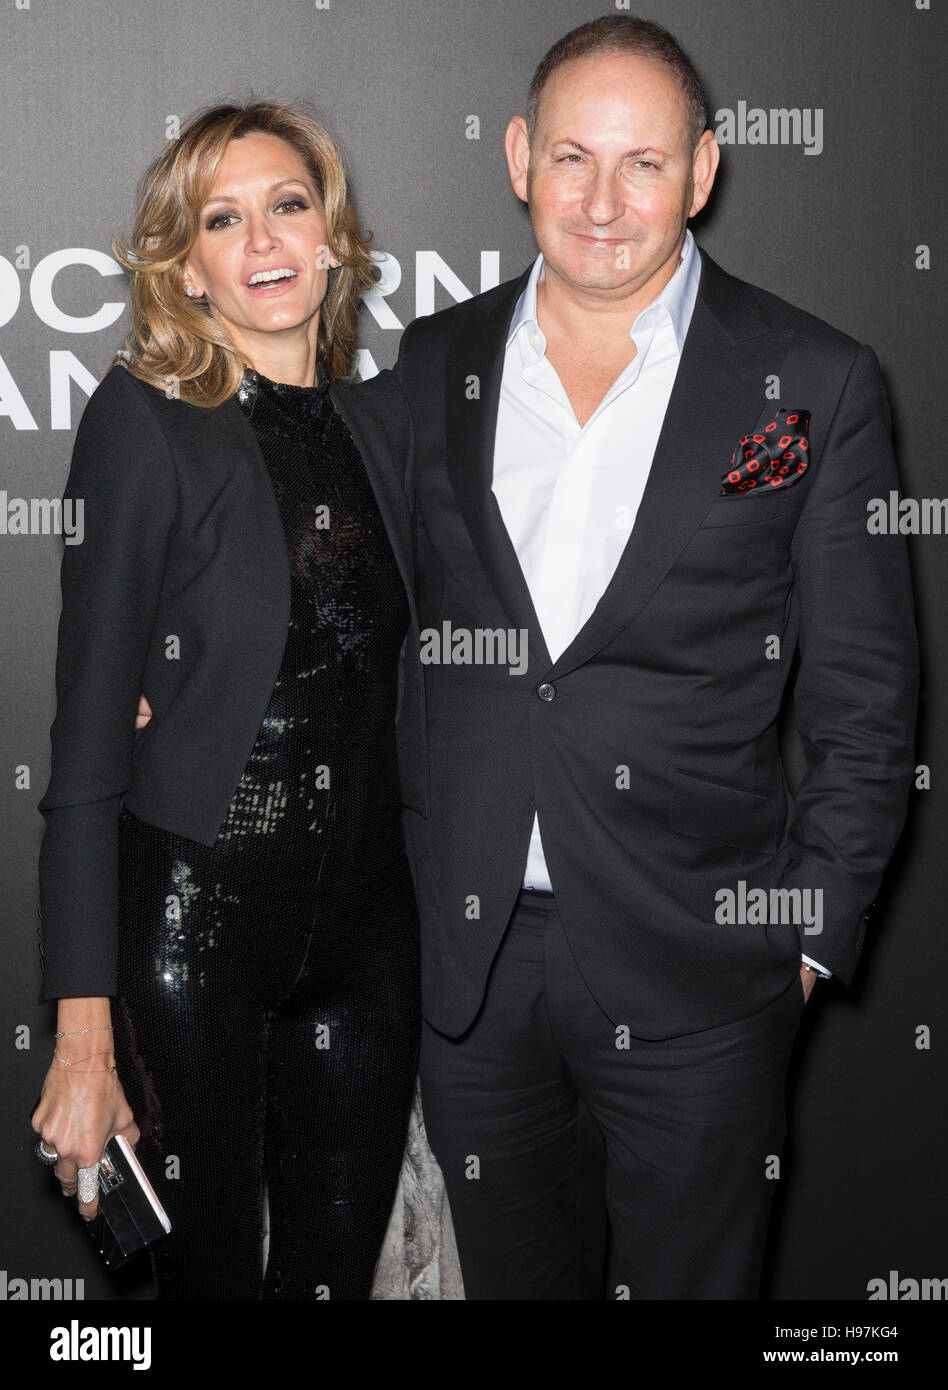 New York City, USA - November 17, 2016: Ulla Parker and John Demsey attend the 'Nocturnal Animals' New York premiere held at The Paris Theatre Stock Photo